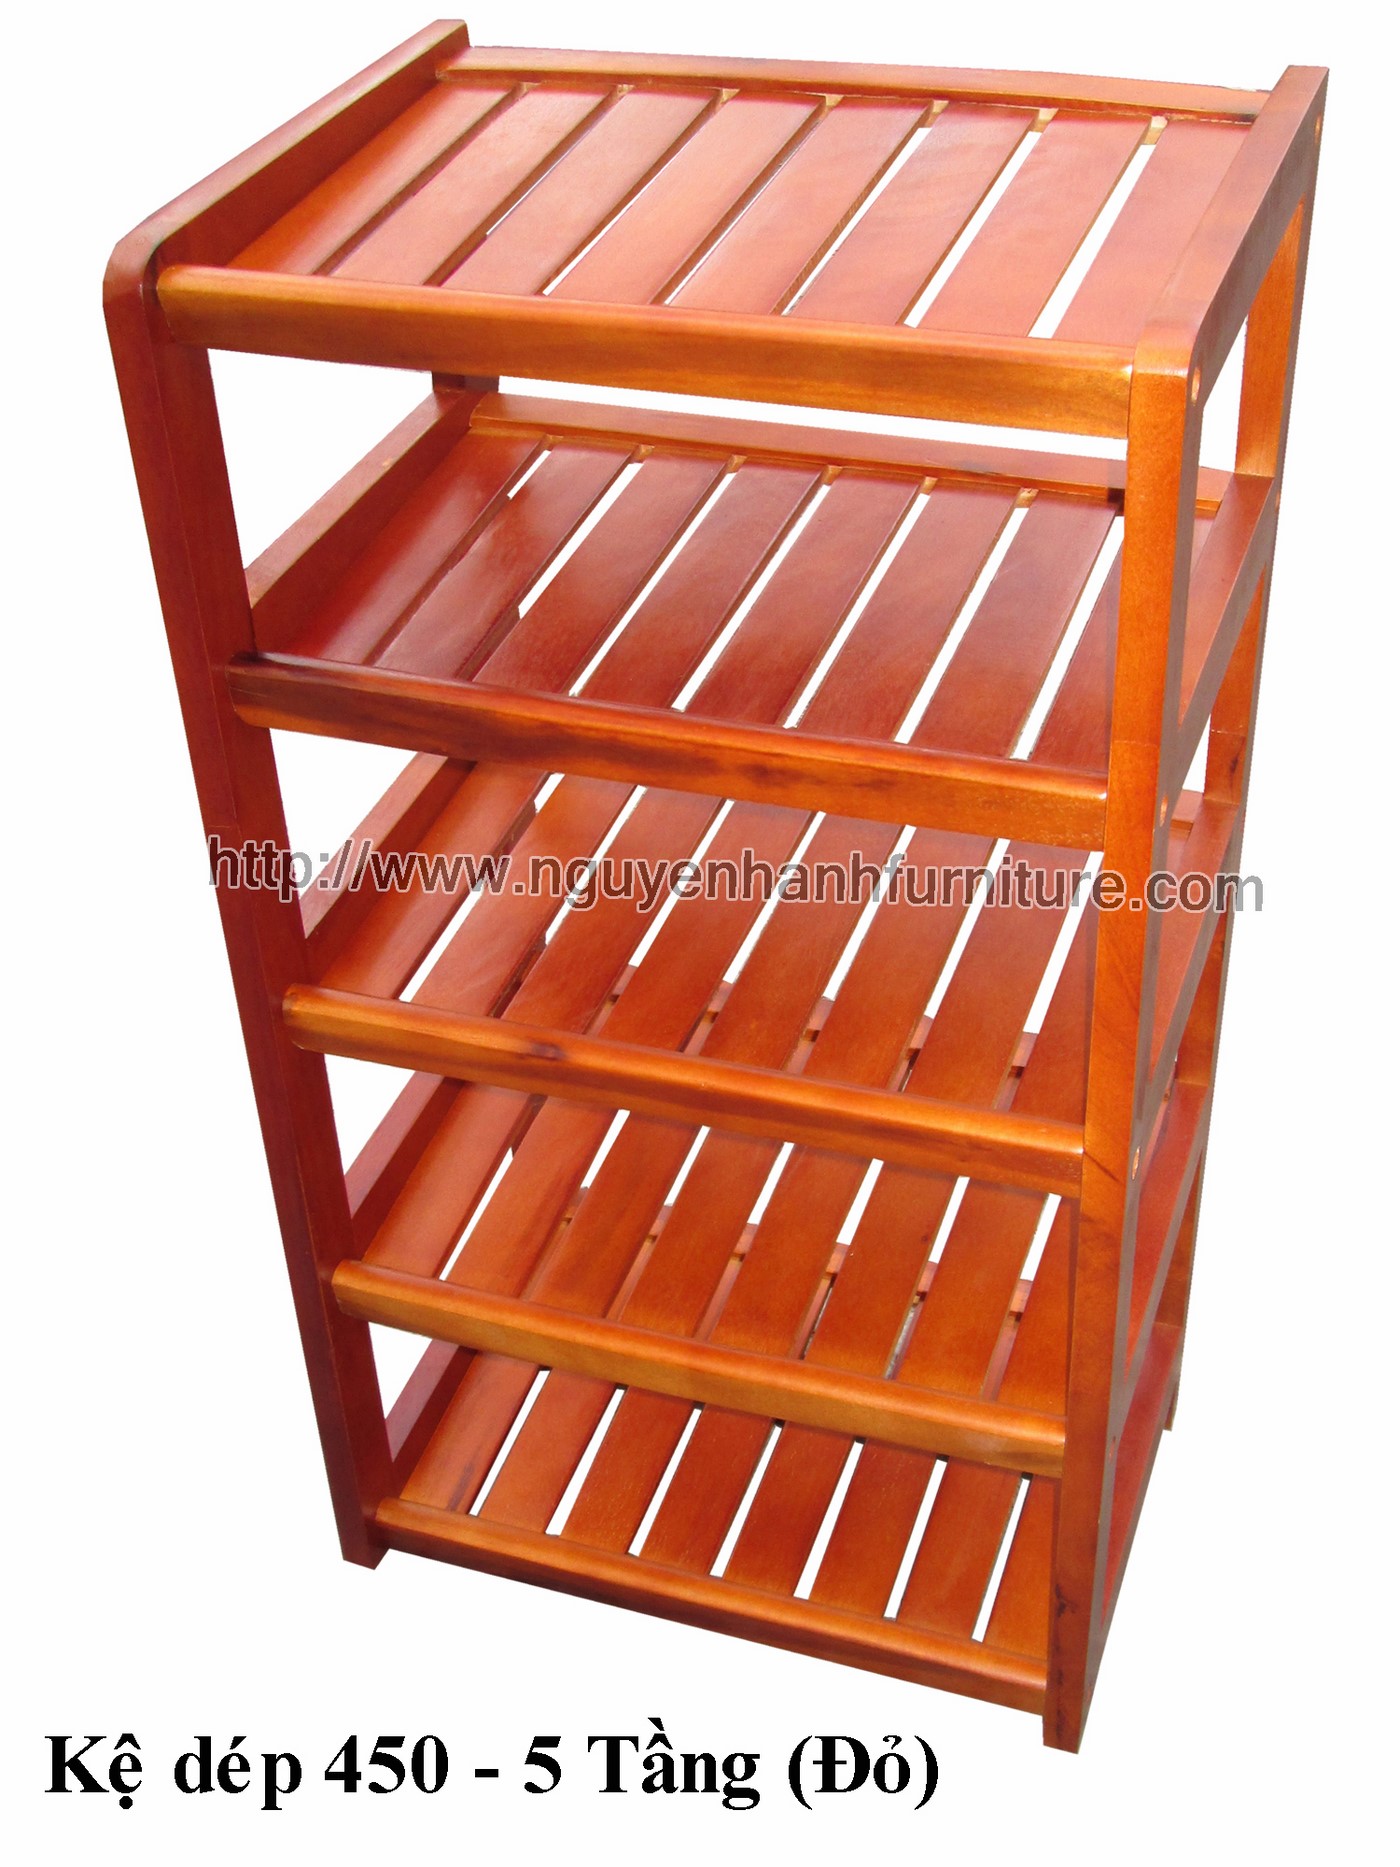 Name product: Shoeshelf 5 Floors 45 with sparse blades (Red) - Dimensions: 45 x 30 x 82 (H) - Description: Wood natural rubber